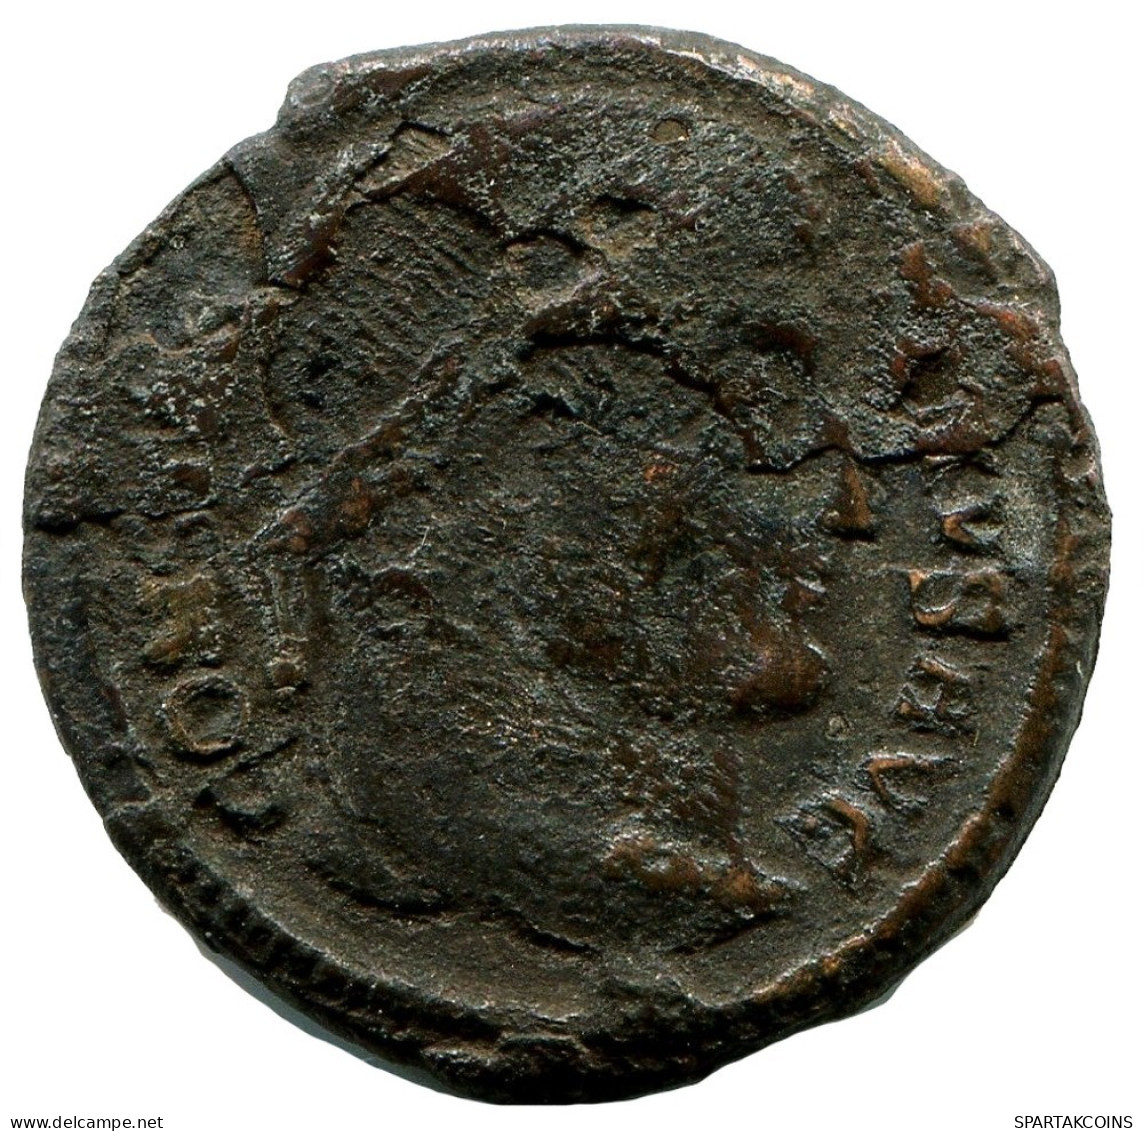 CONSTANTINE I MINTED IN CYZICUS FOUND IN IHNASYAH HOARD EGYPT #ANC11029.14.D.A - L'Empire Chrétien (307 à 363)